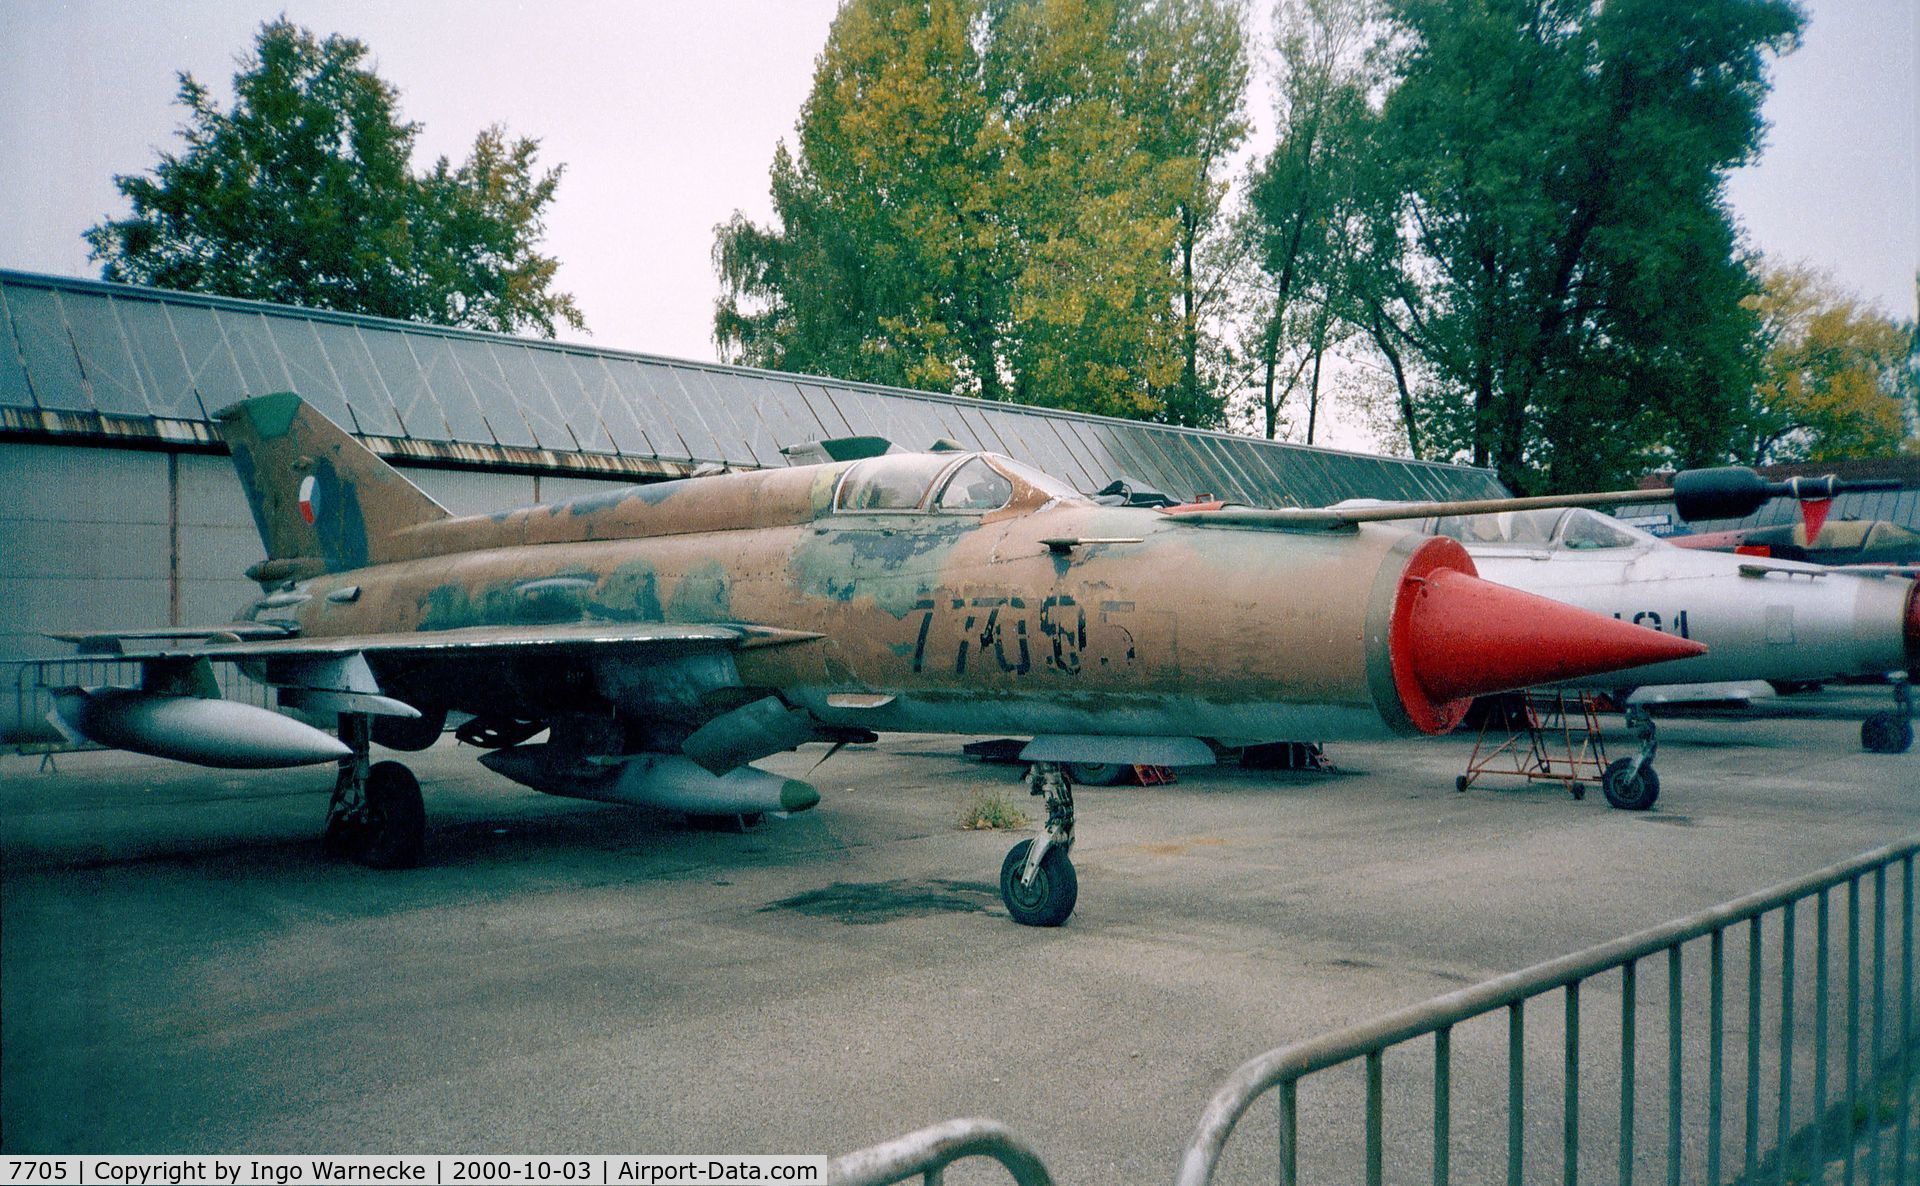 7705, 1973 Mikoyan-Gurevich MiG-21MF C/N 967705, Mikoyan i Gurevich MiG-21MF Fishbed-J of the czechoslovak air force at the Letecke Muzeum, Prague-Kbely